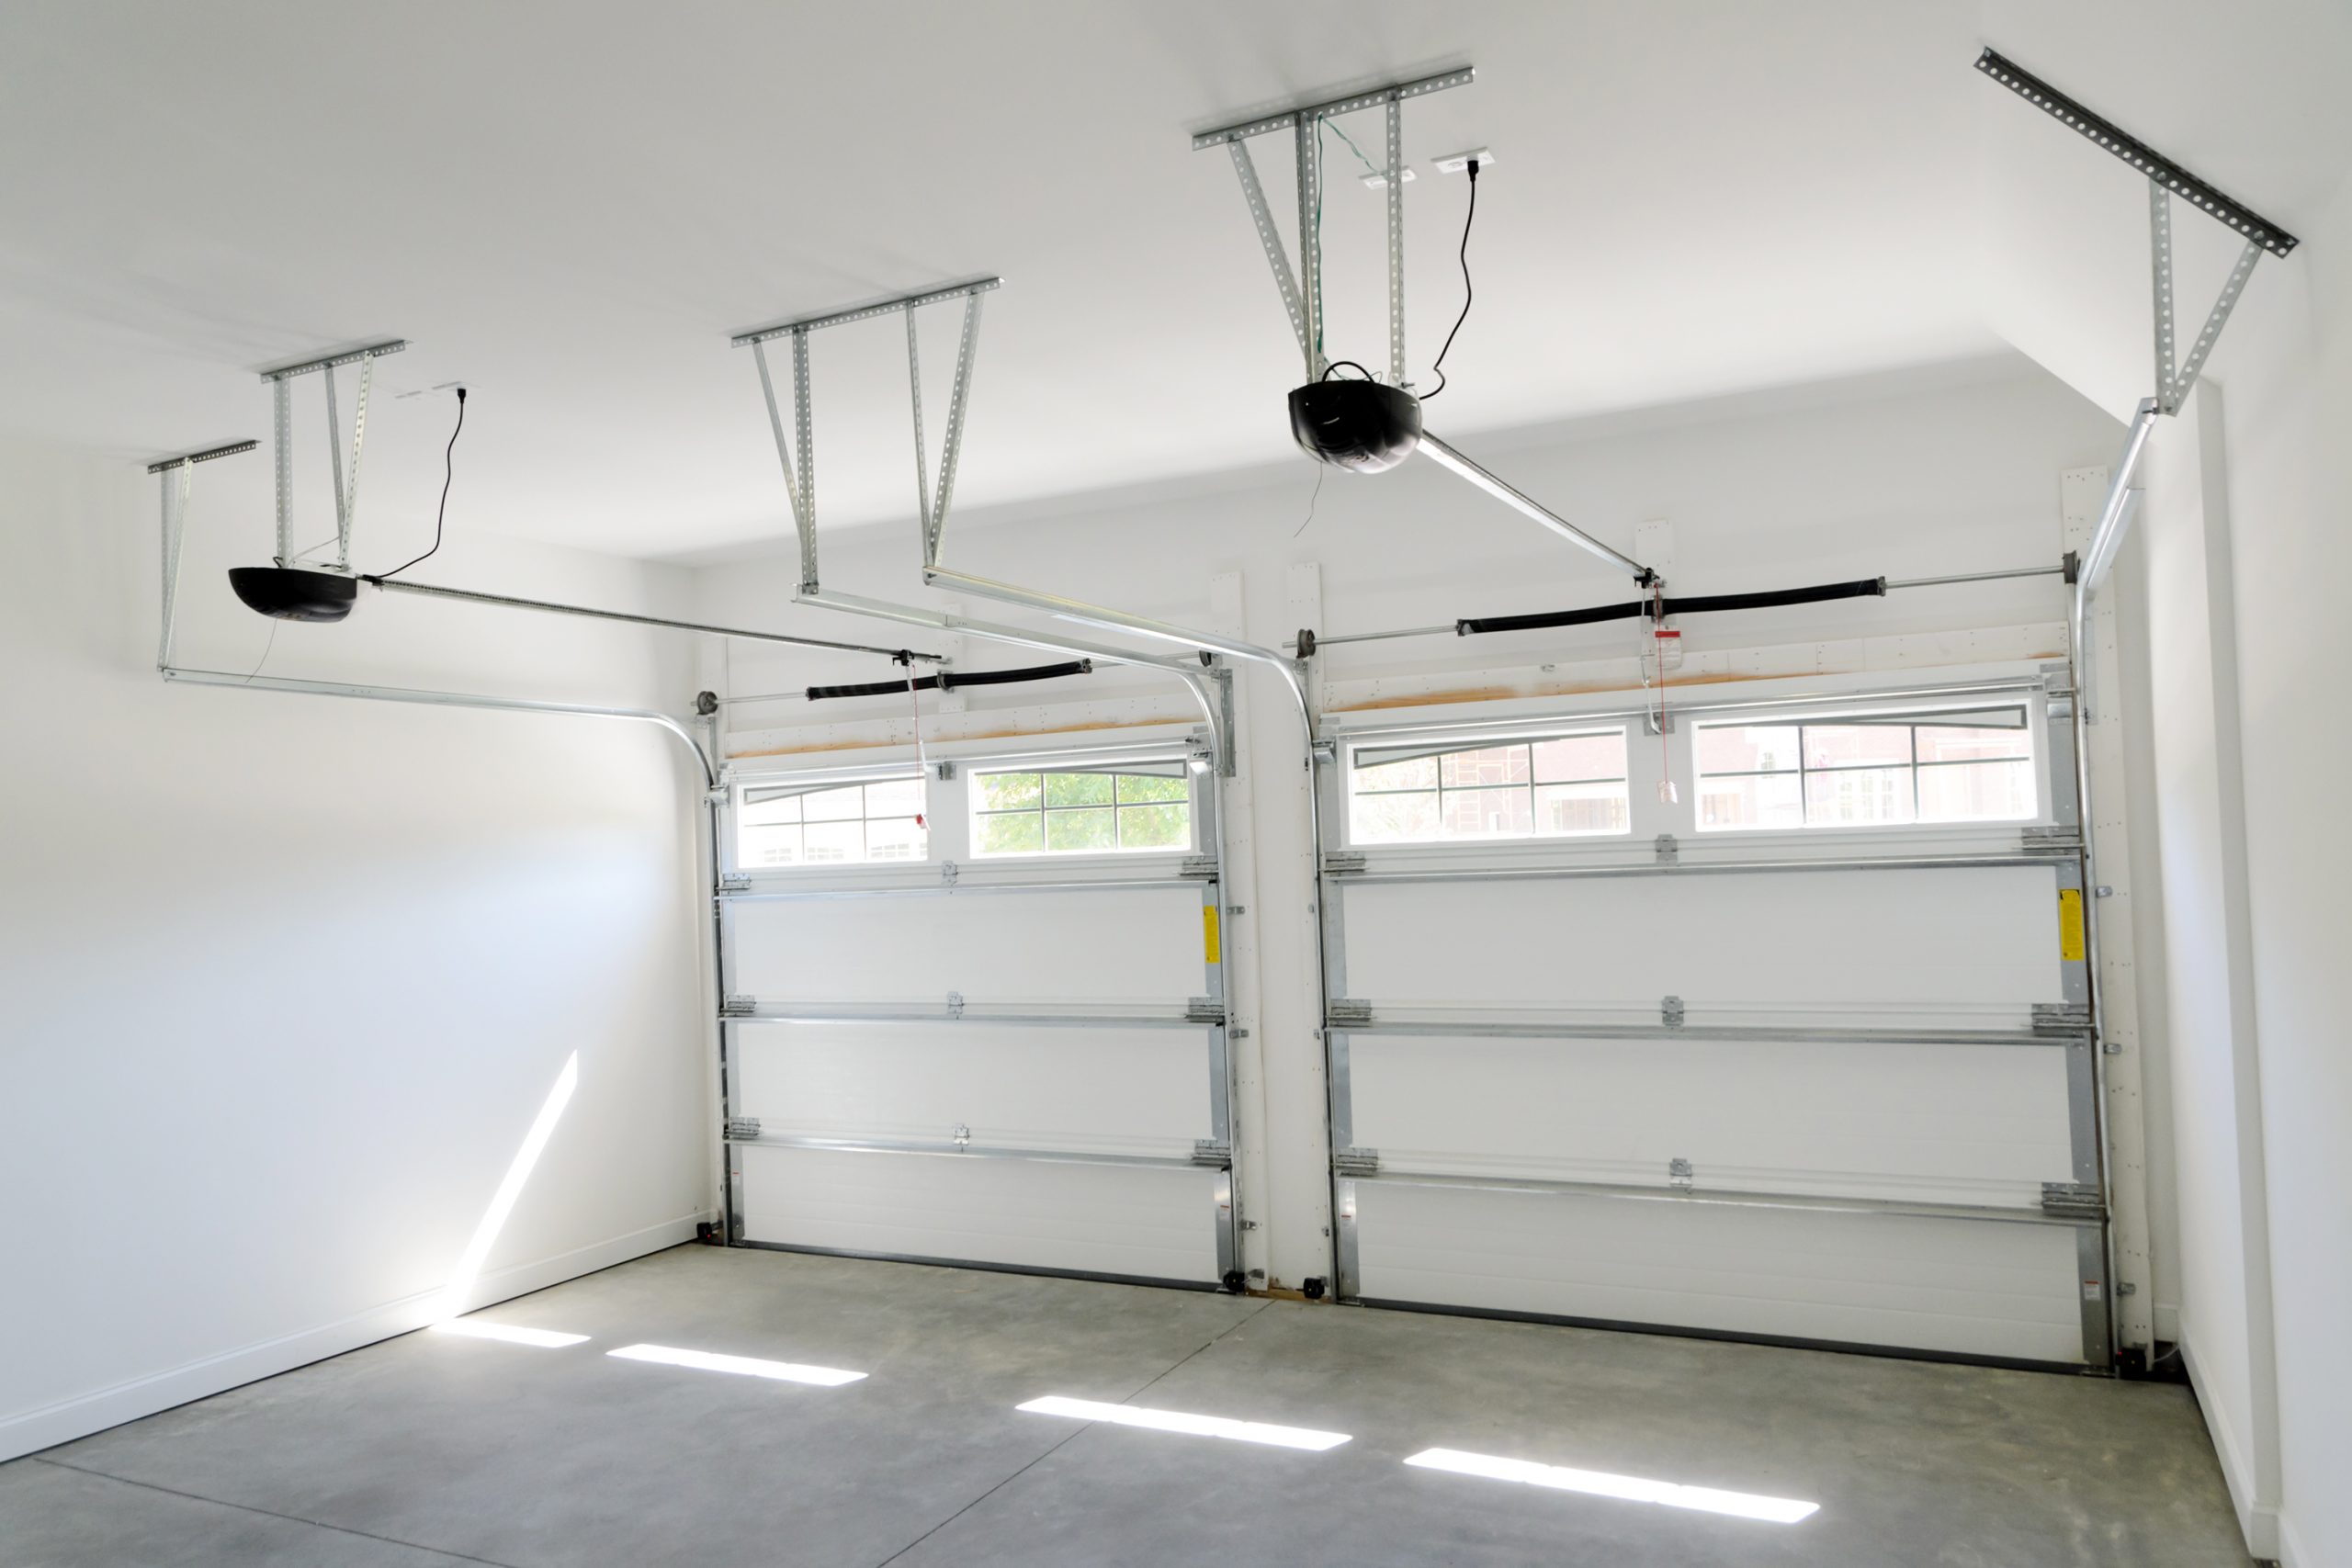 Do Insulated Garage Doors Really Make a Difference?